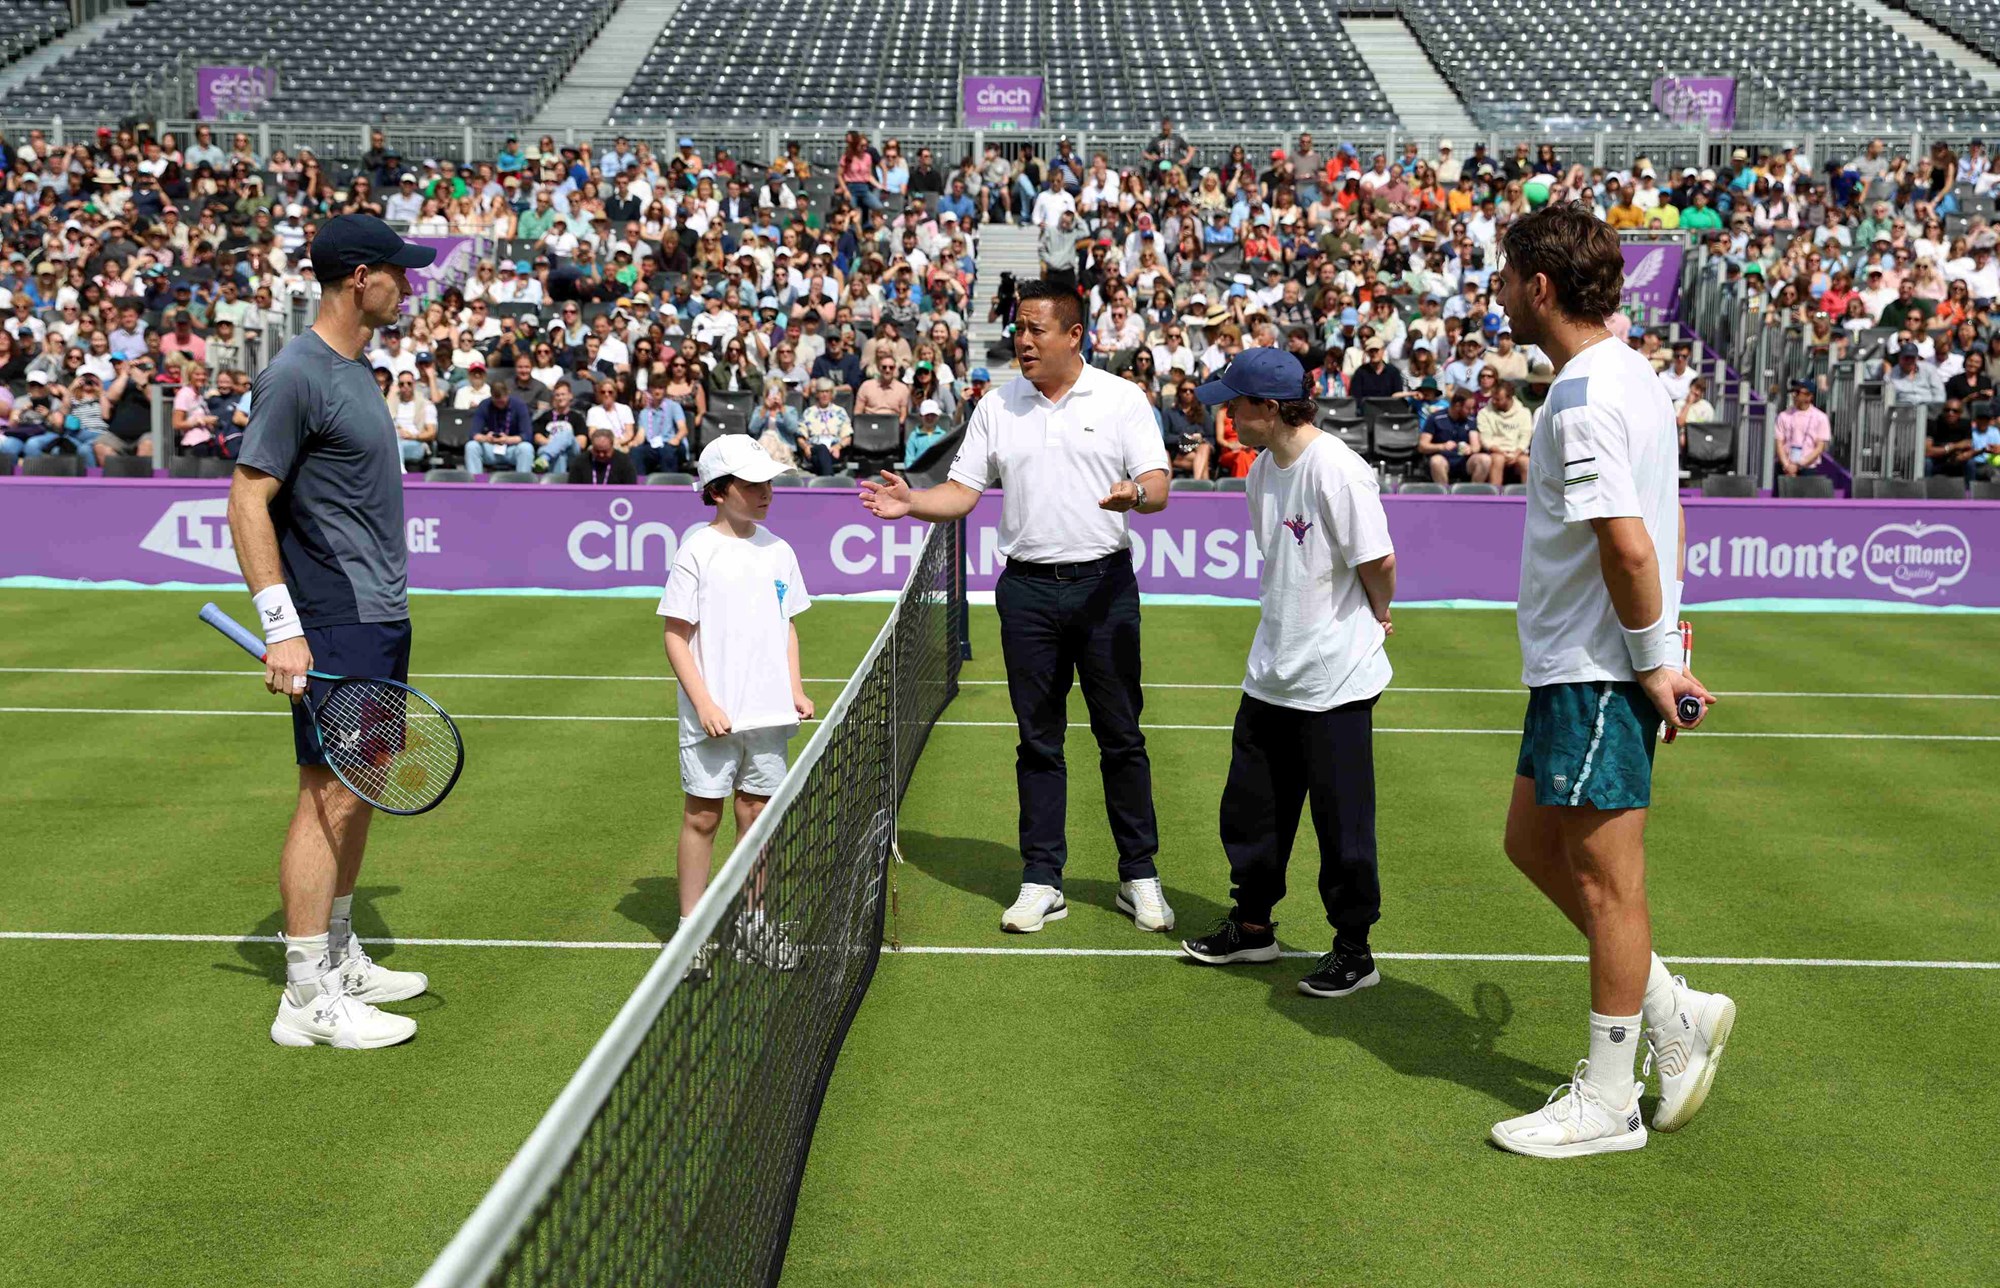 Andy Murray and Cam Norrie stood on court with two young children while chair umpire James Keothavong prepares for the coin toss